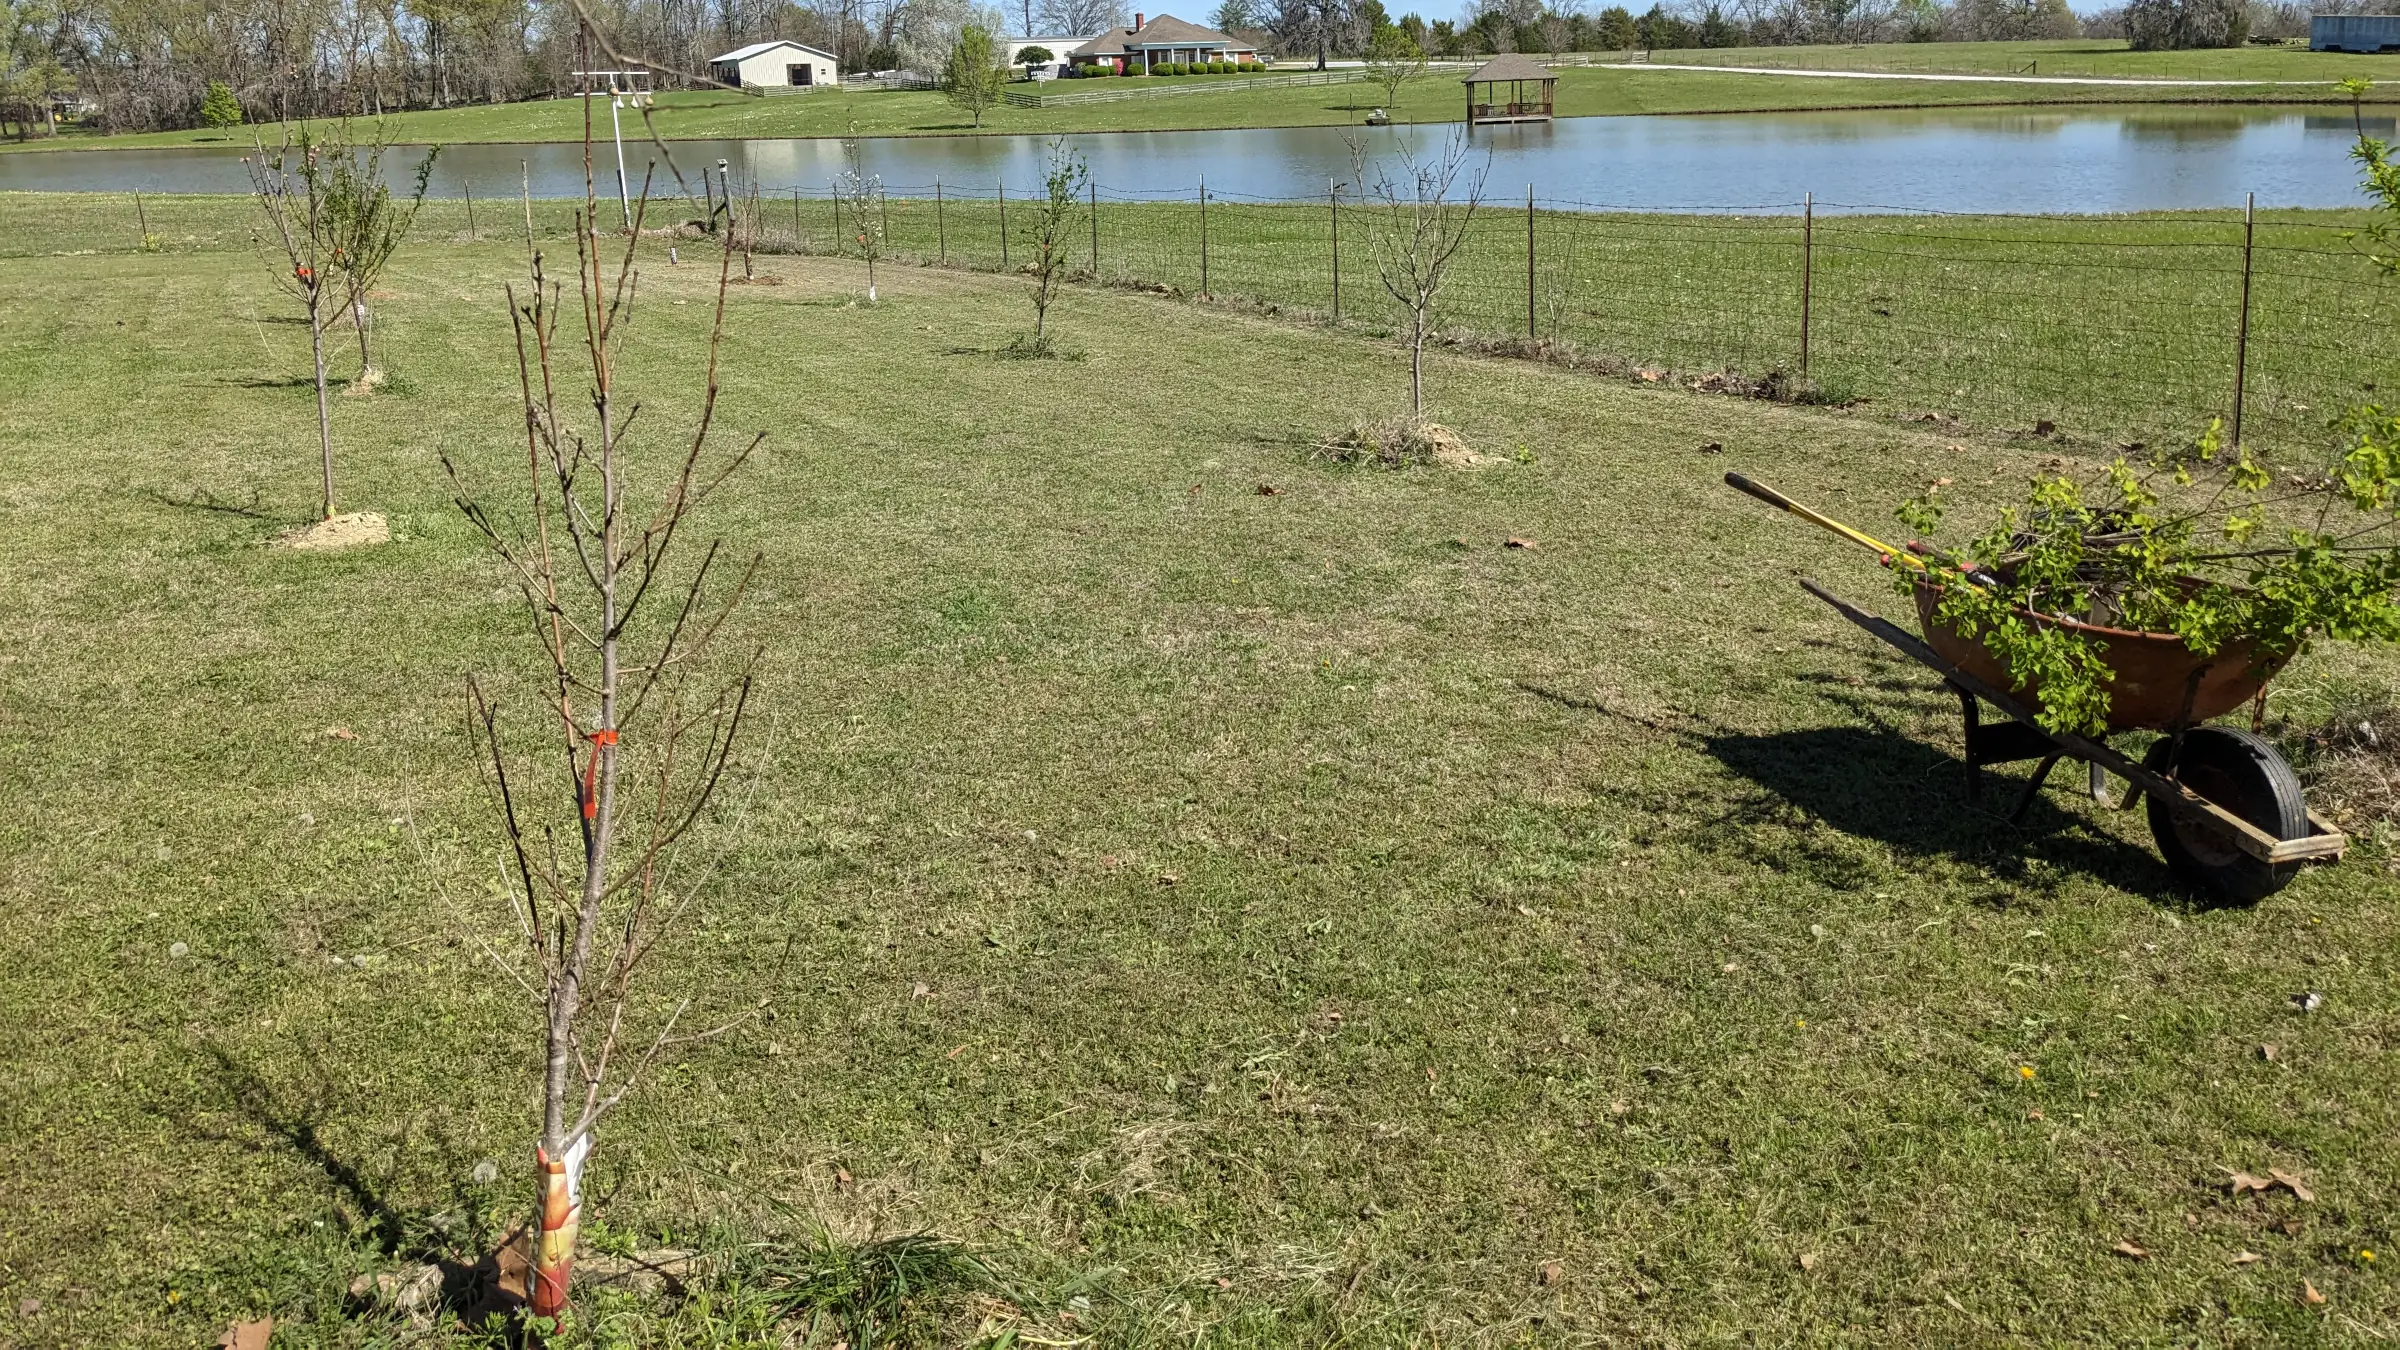 Young fruit tree orchard with a wire fence and pond in the background.